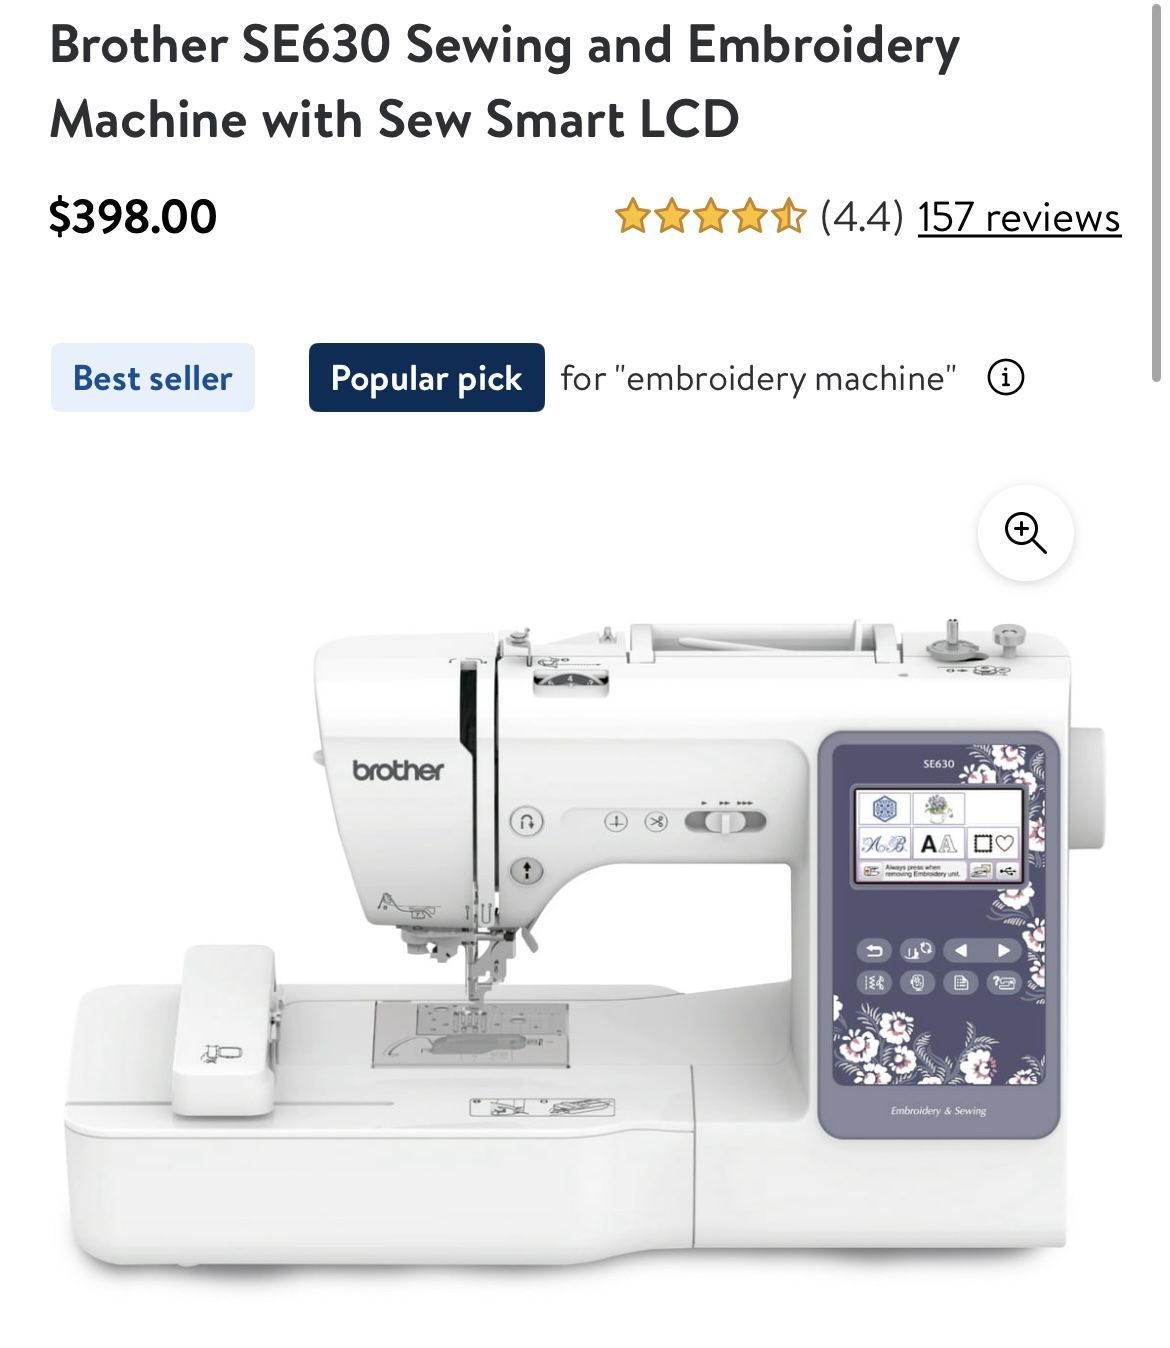 BROTHER SE630 Sewing/Embroidery Machine